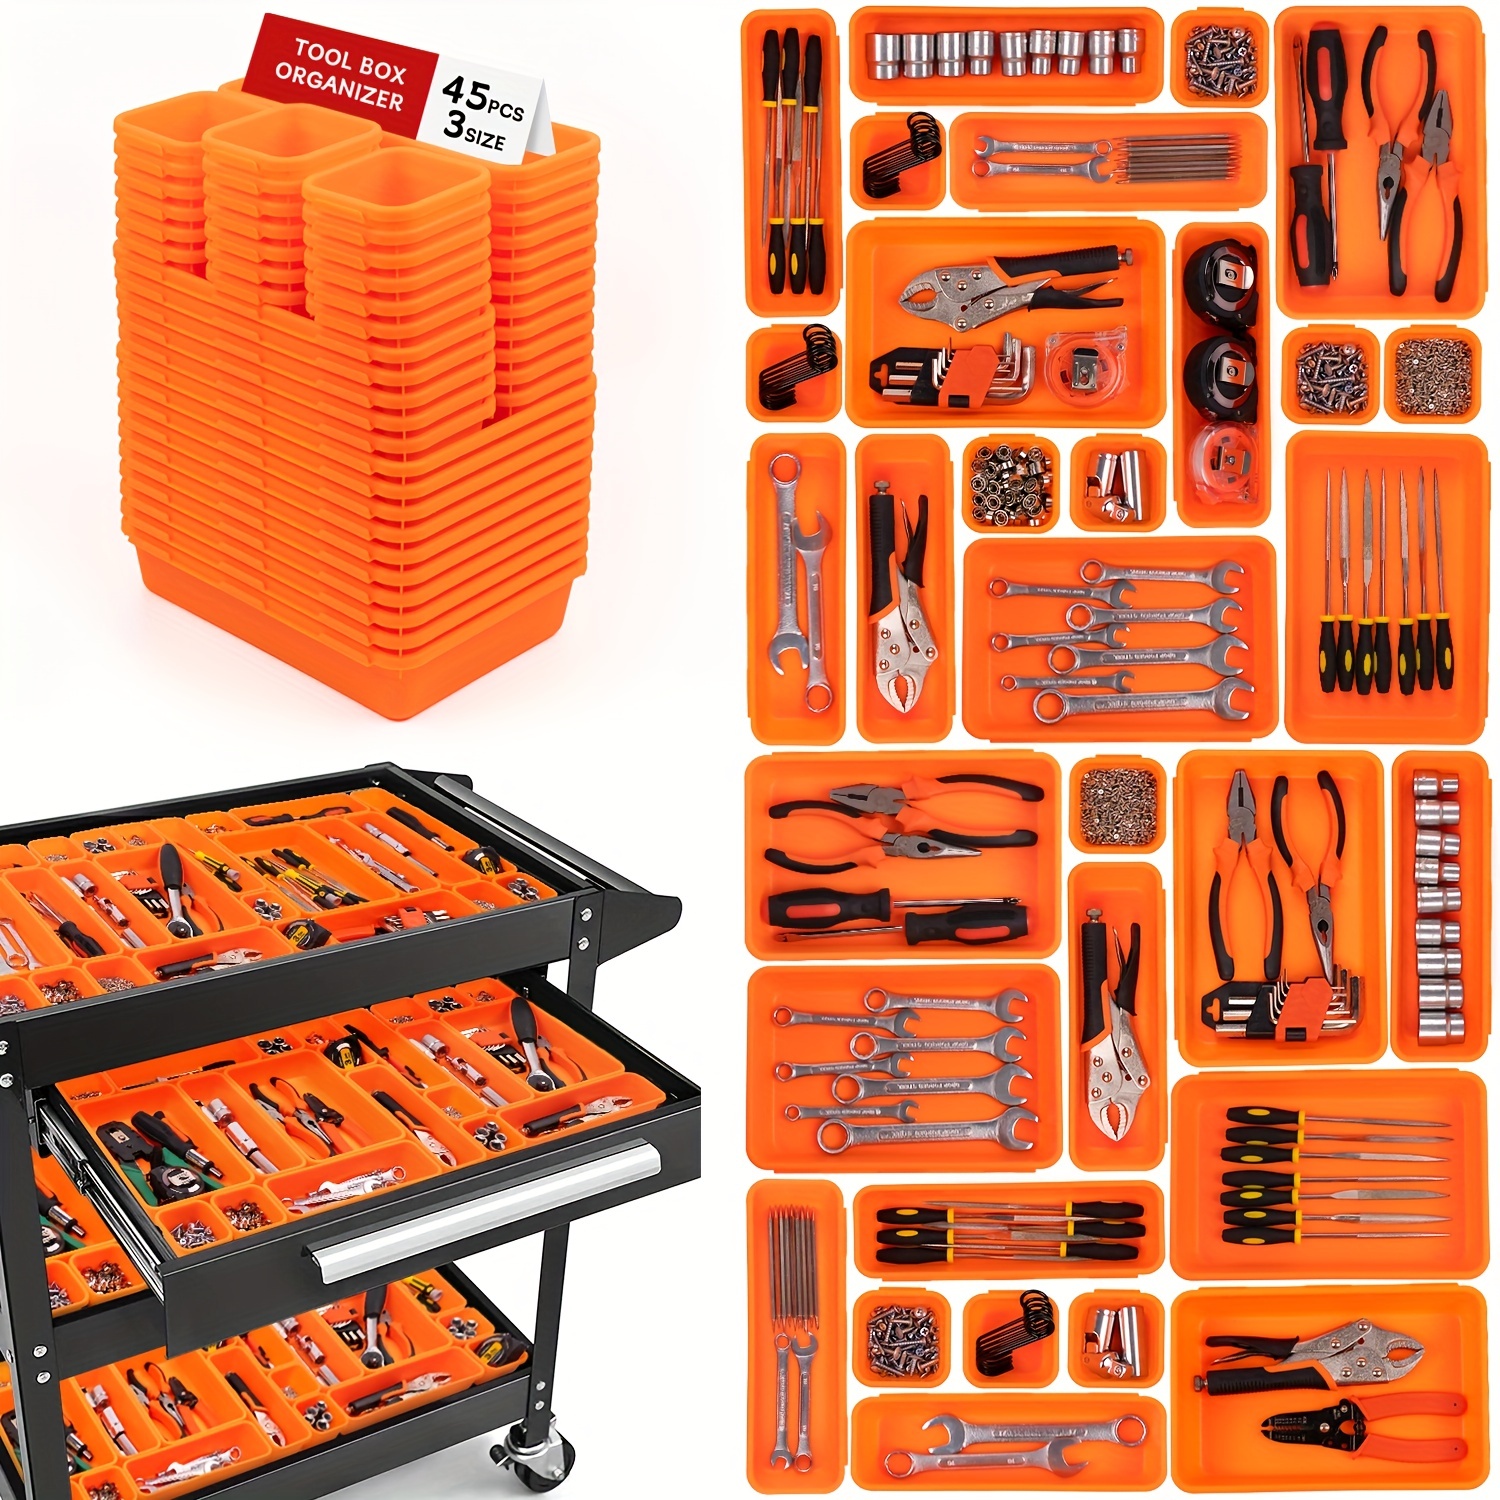 21 Best Tool Tray Organizers & Organized Toolboxes of 2021